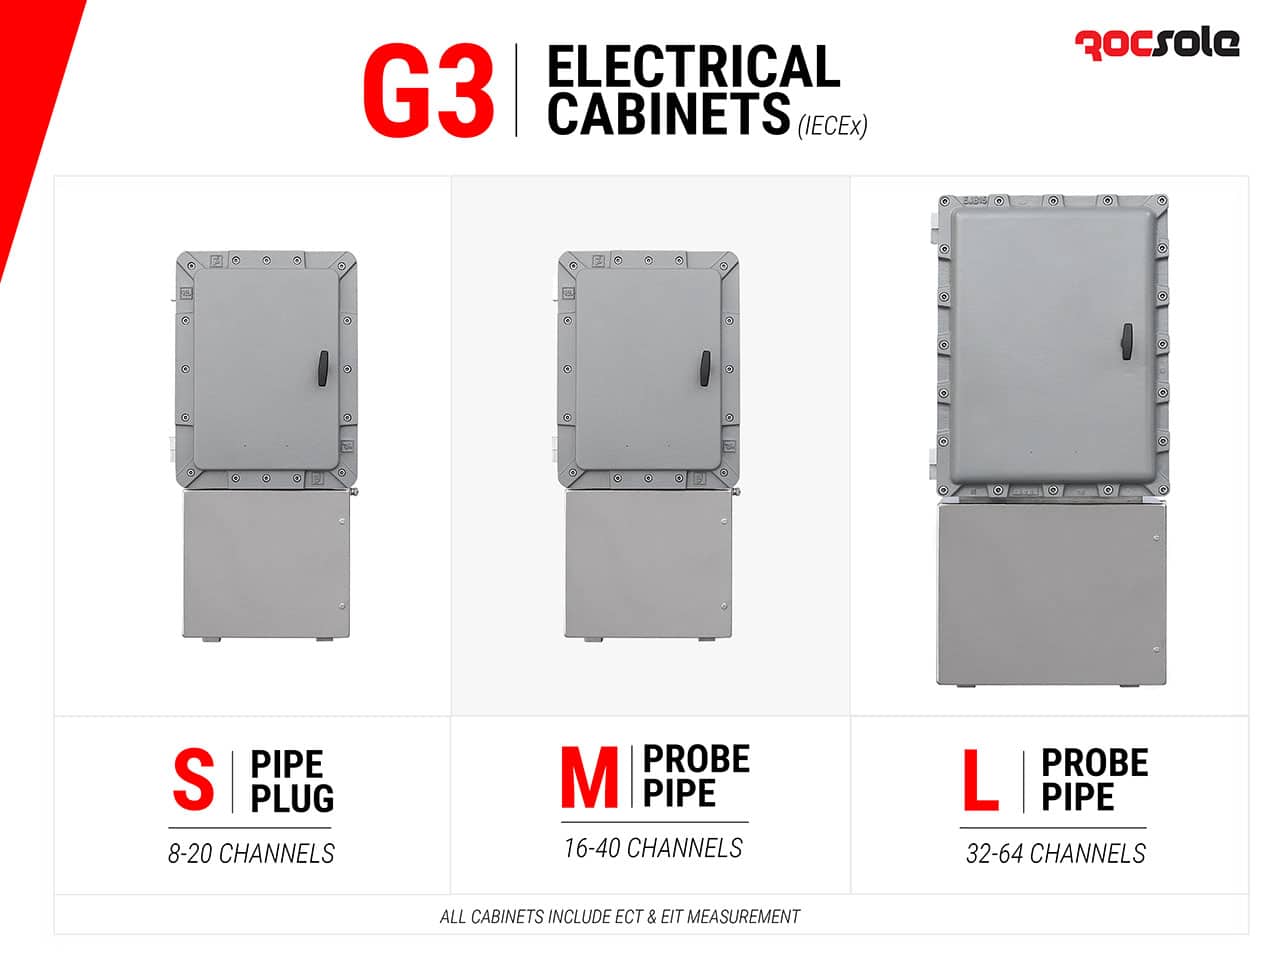 Rocsole - G3 Electrical Cabinets.jpg